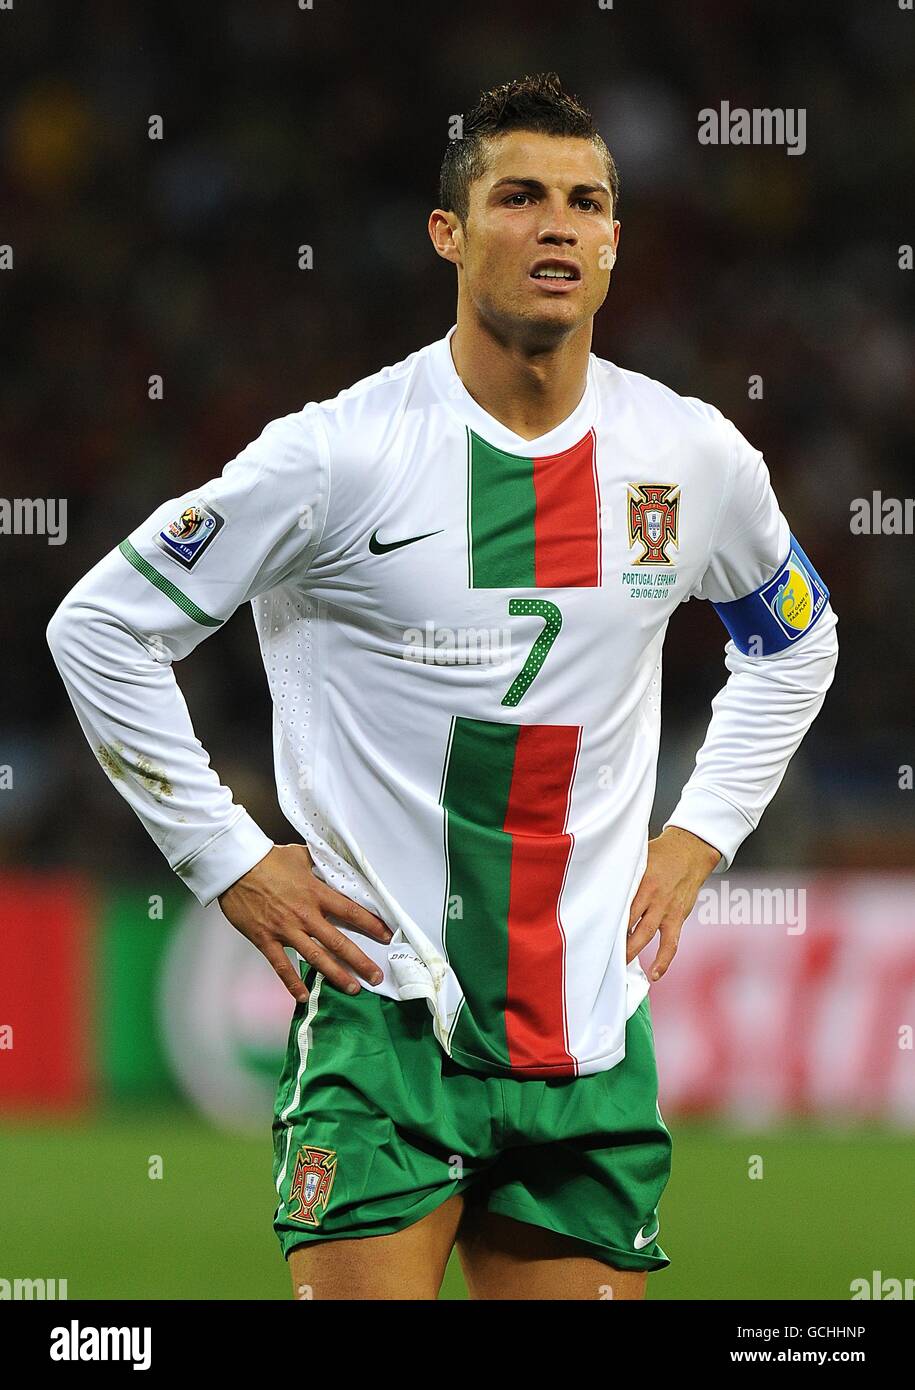 Portugal's Cristiano Ronaldo during the 2010 FIFA World Cup soccer match,  Group G, Ivory Coast vs Portugal at the Nelson Mandela Bay Stadium, in Port  Elisabeth, South Africa on June 15, 2010.